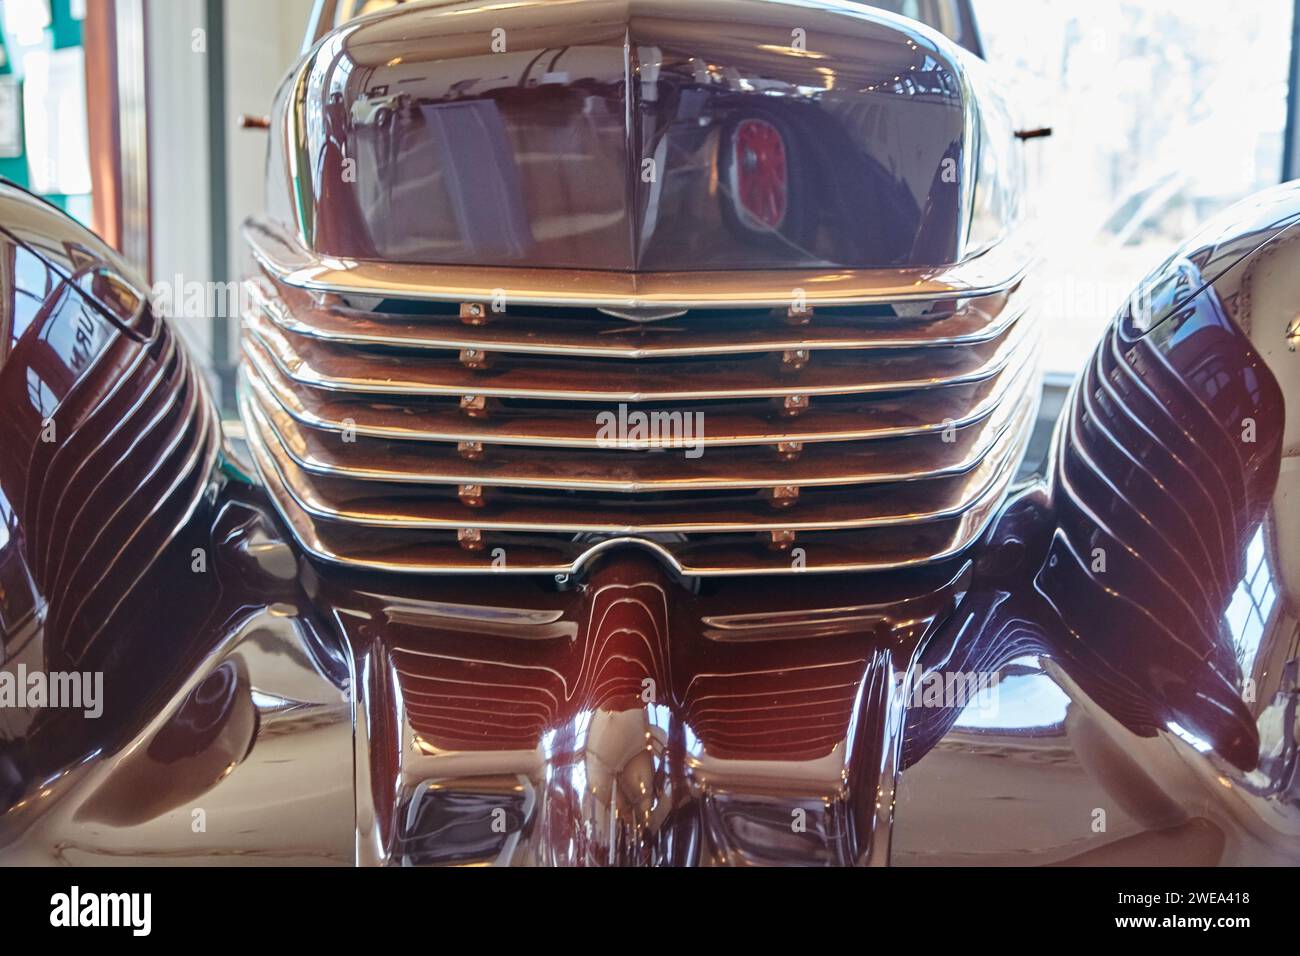 Classic Car Chrome Grille and Bumper Close-Up in Showroom Perspective Stock Photo